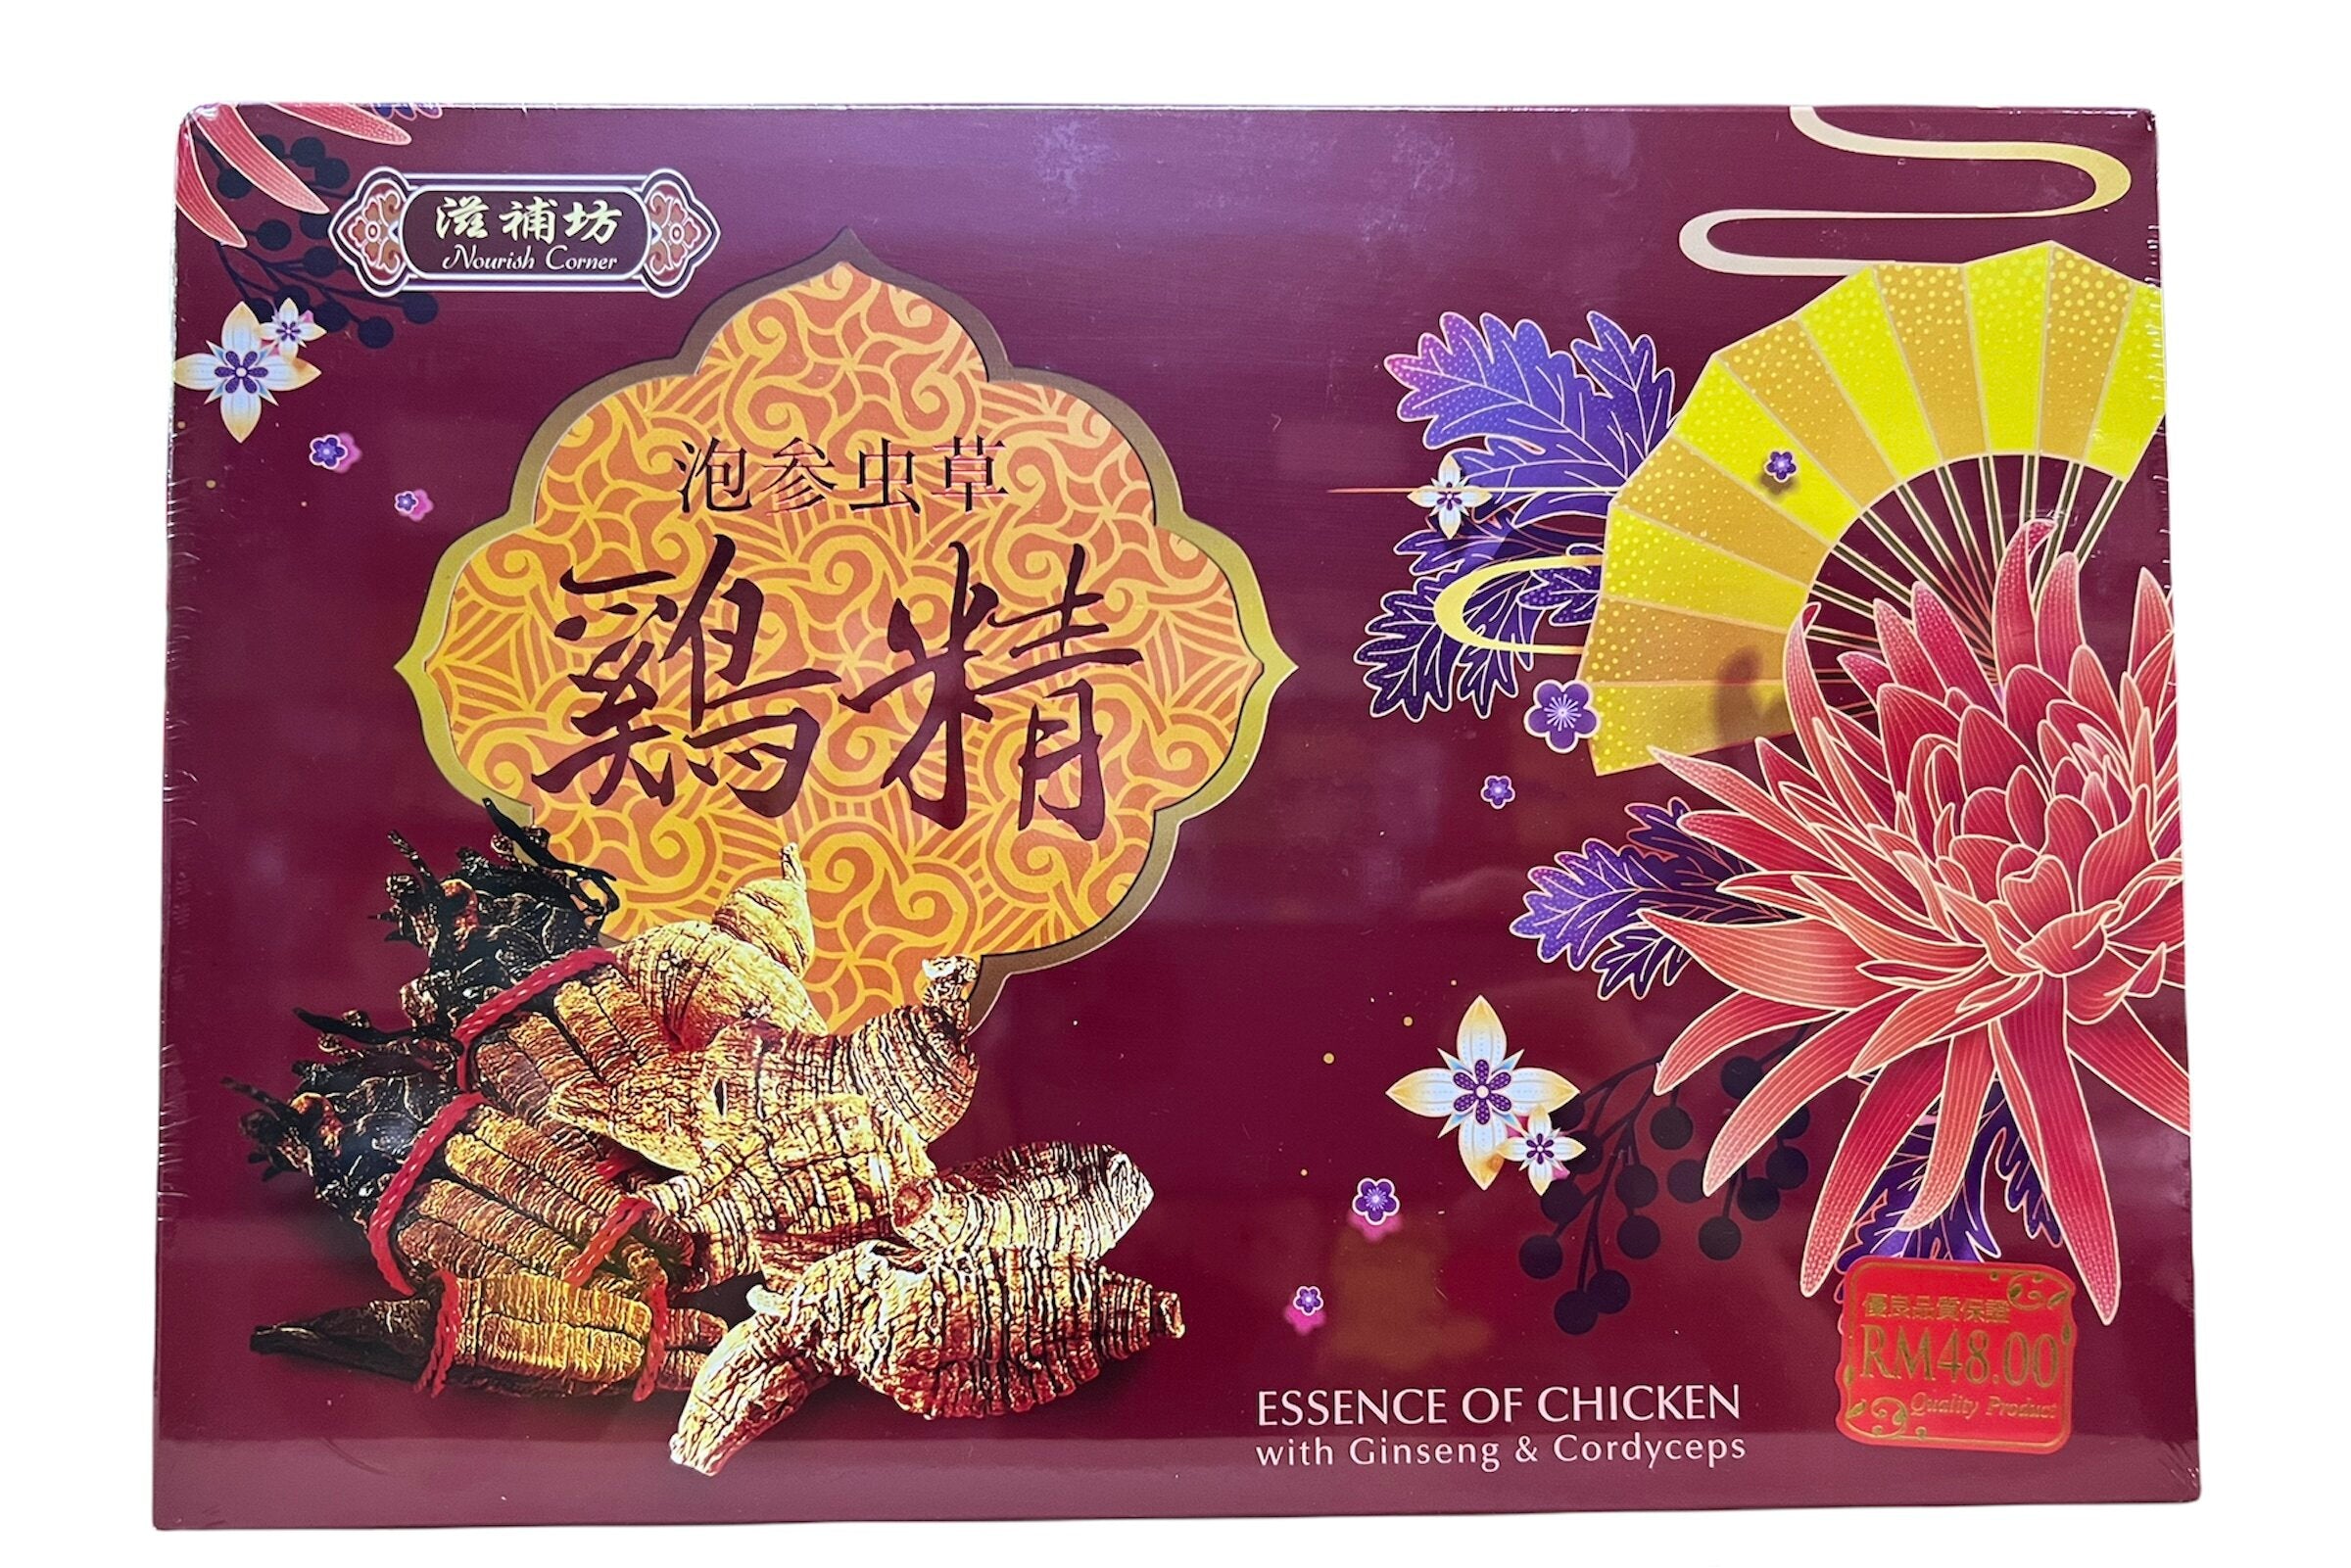 Essence of Chicken with American Ginseng & Cordyceps